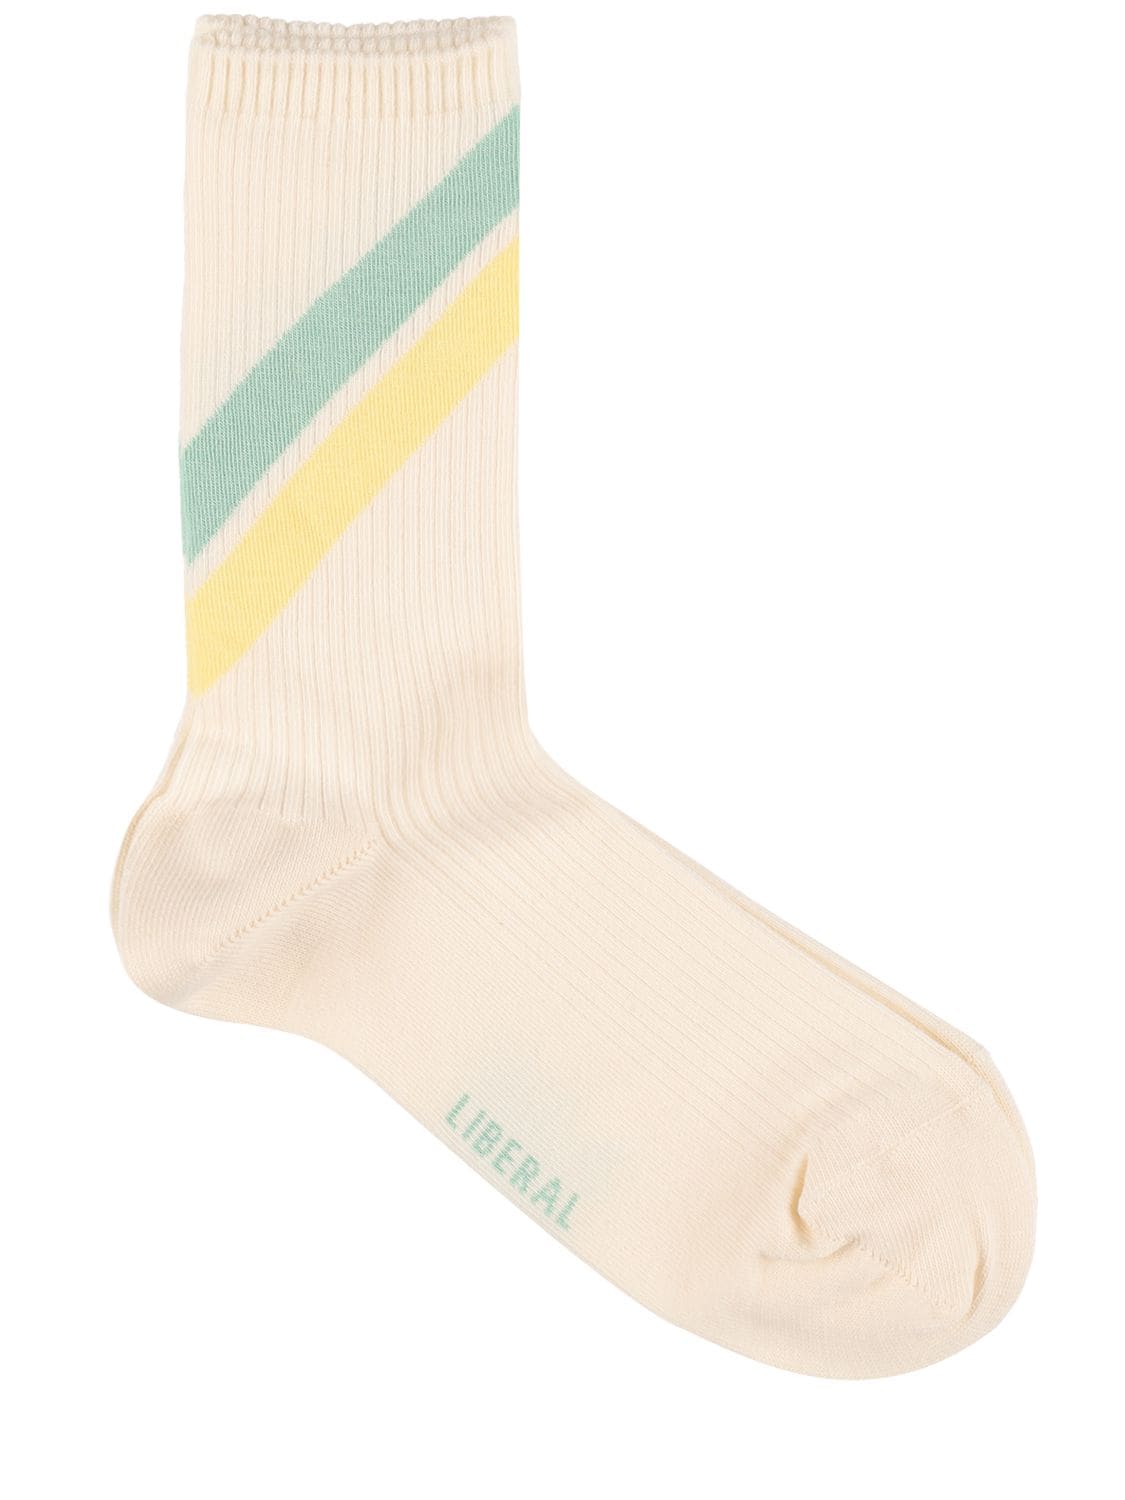 LIBERAL YOUTH MINISTRY Striped Cotton Blend Soccer Socks